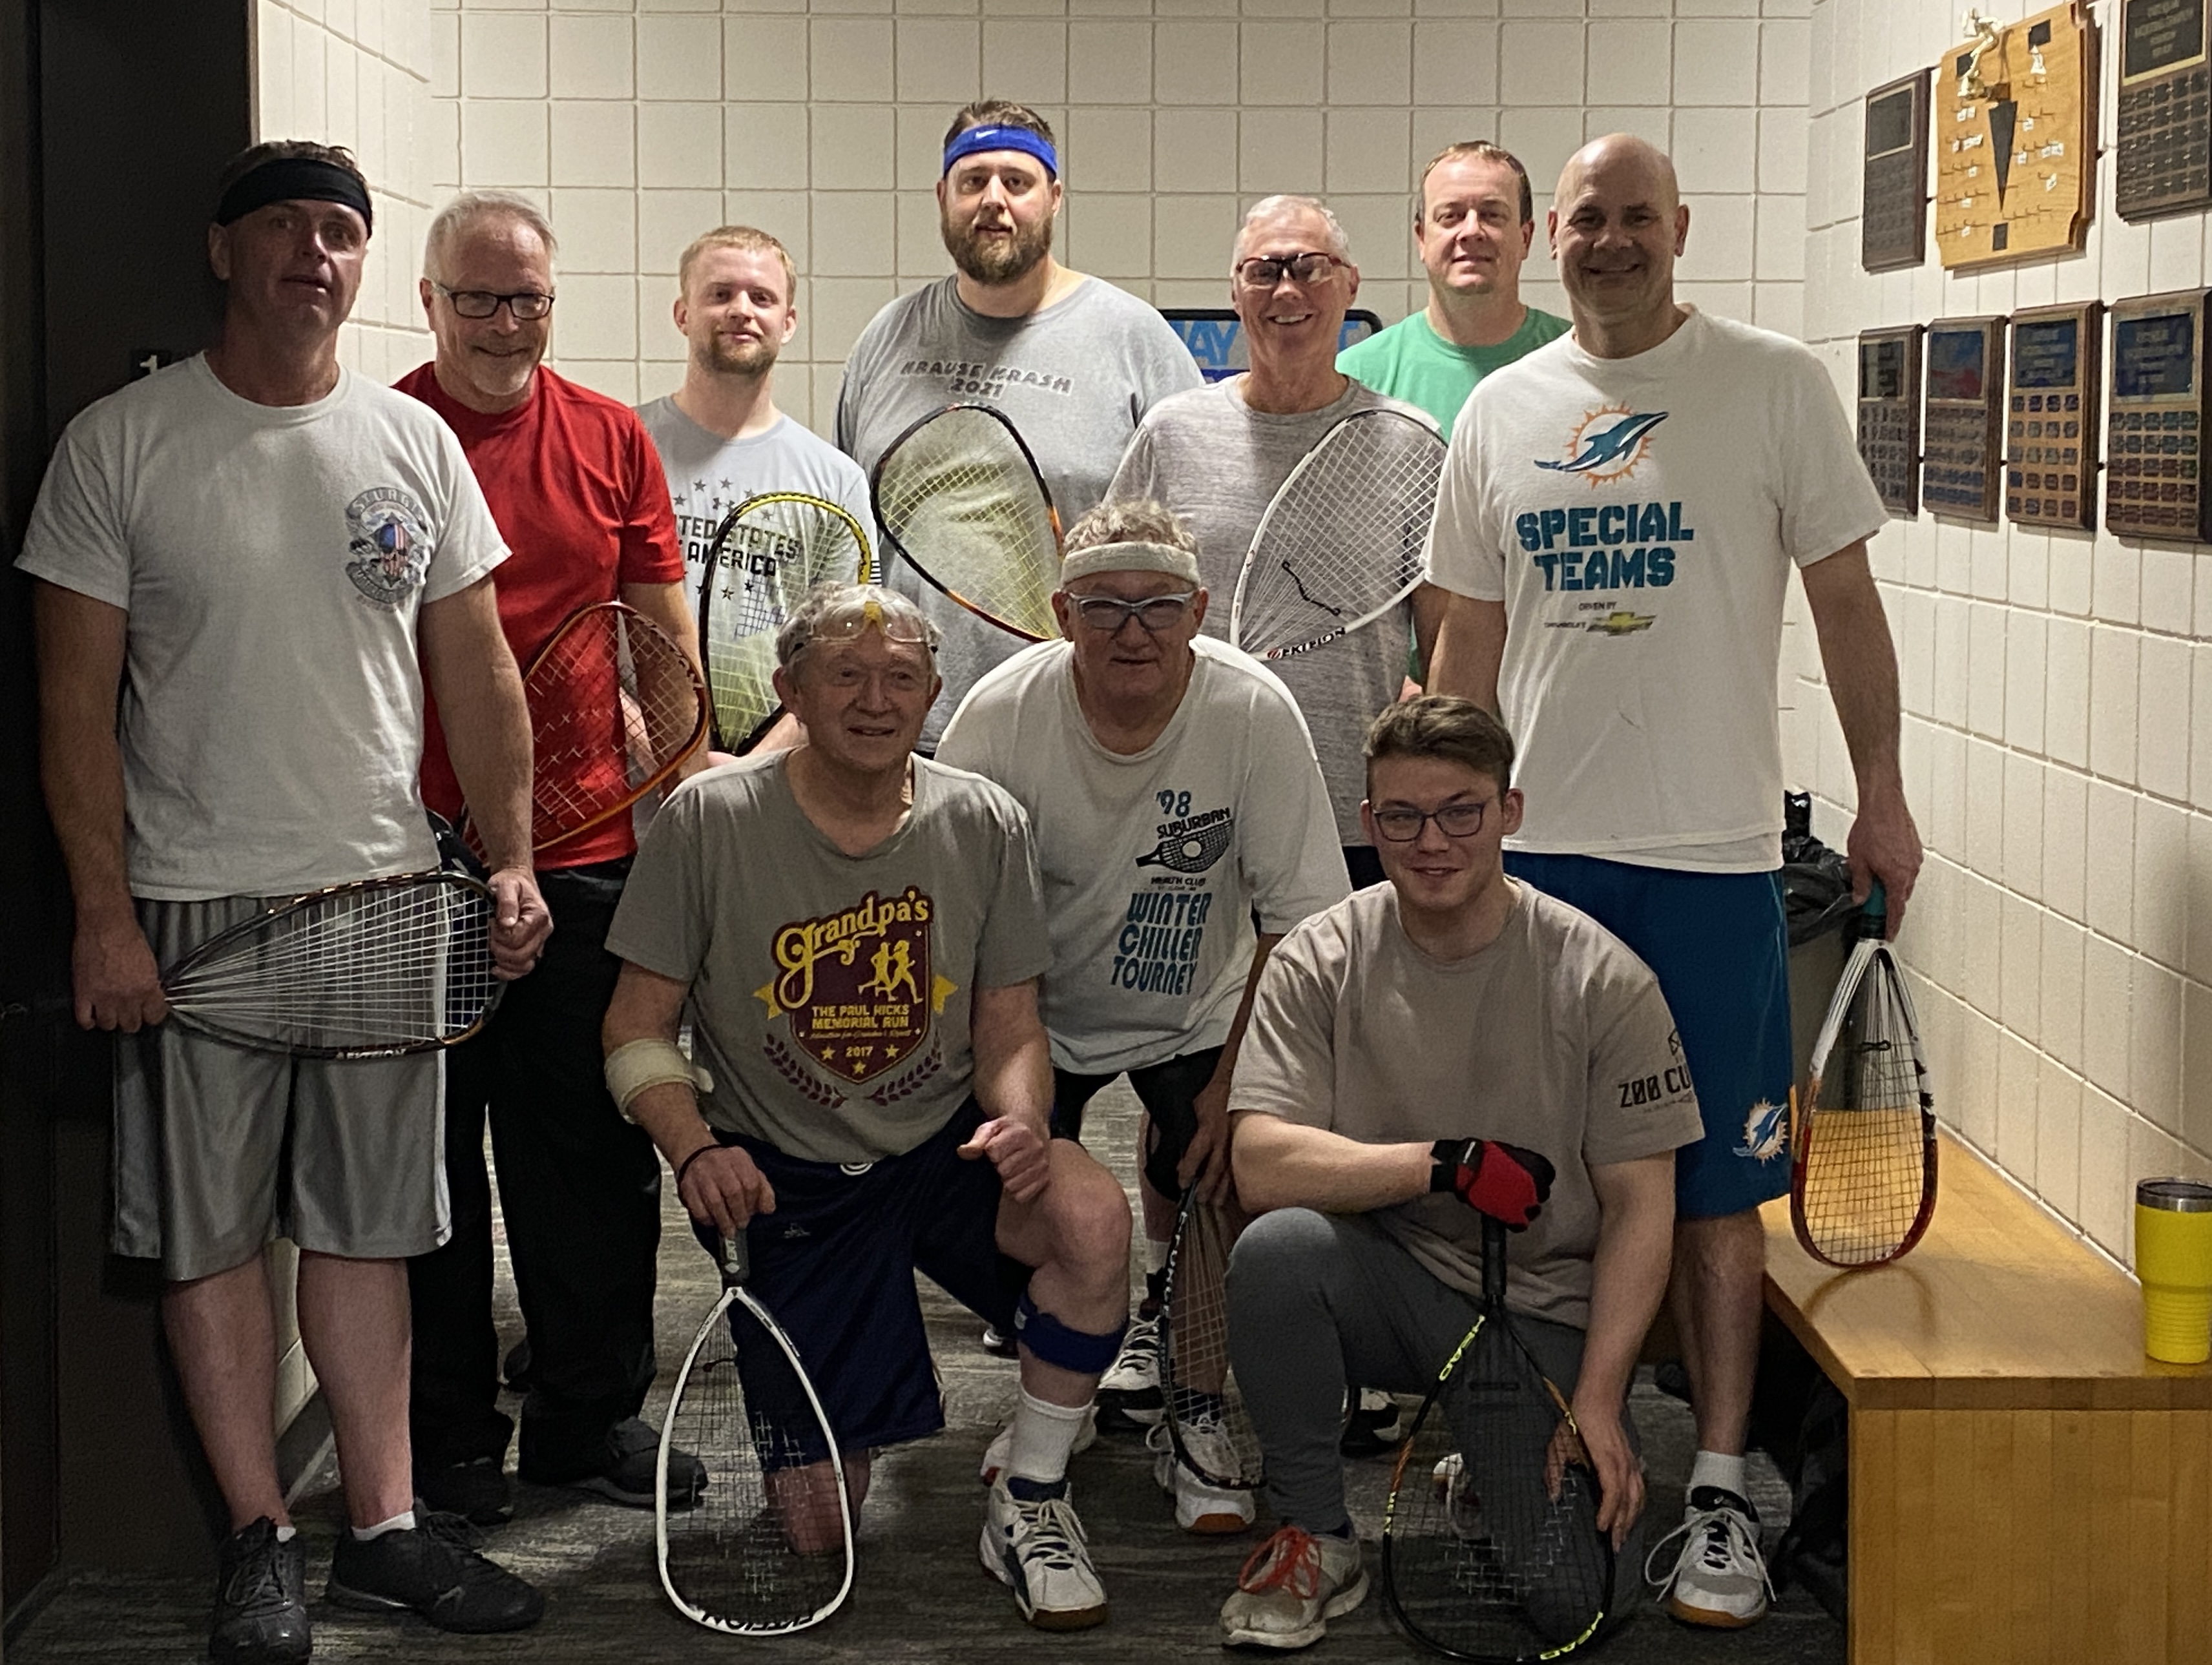 3-30-22 My racquetball boys from Milbank